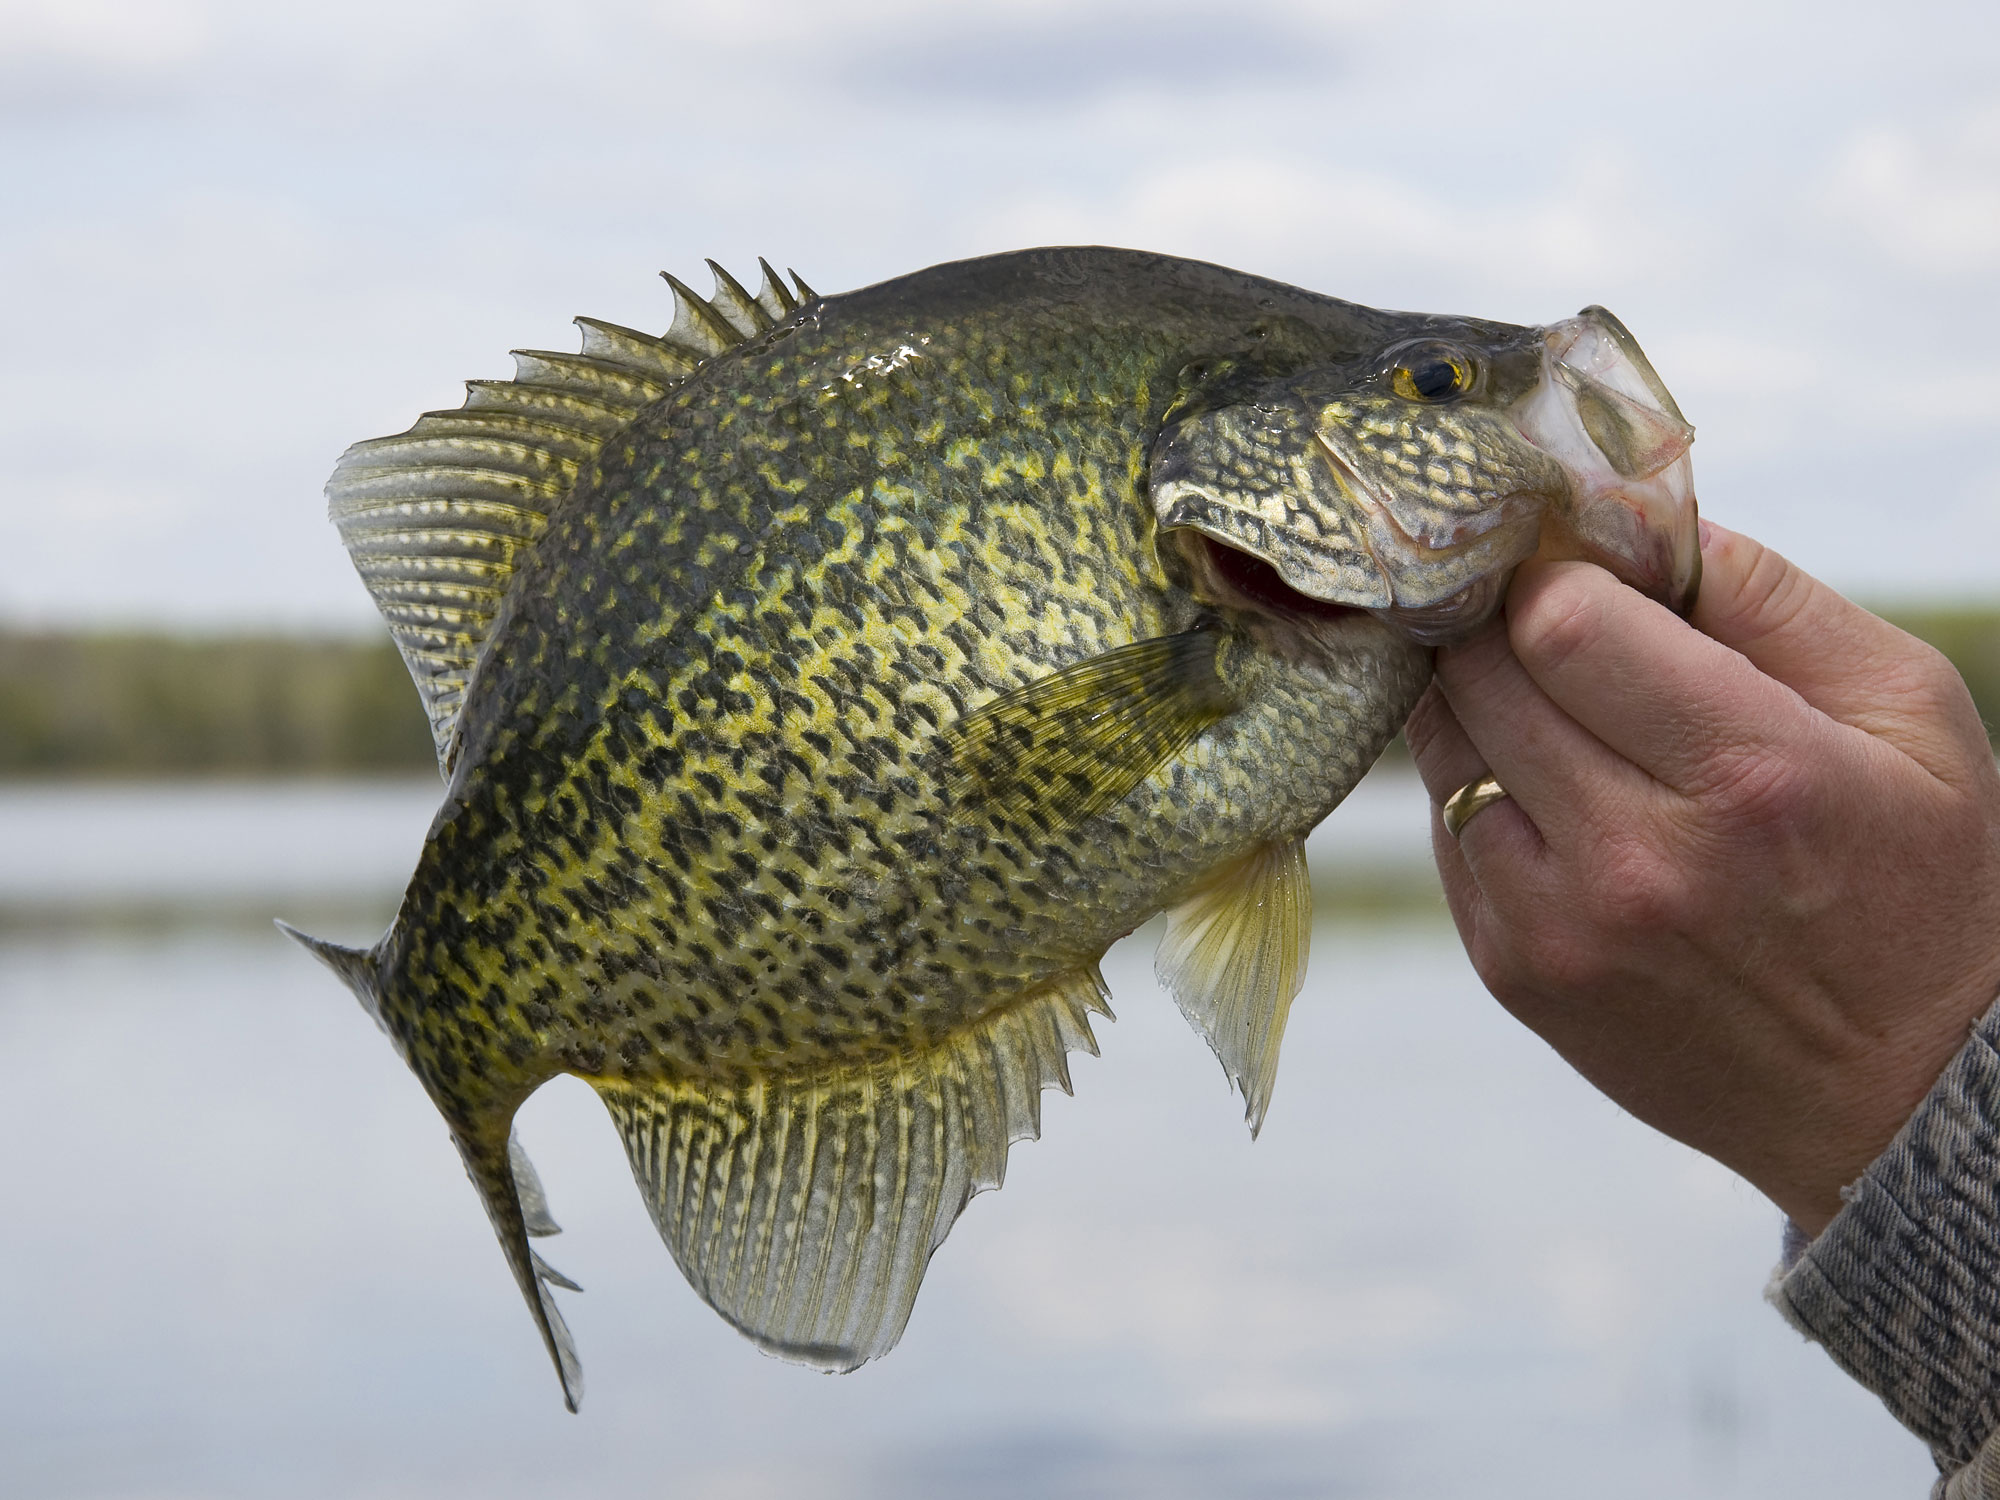 A crappie fish being held in a hand